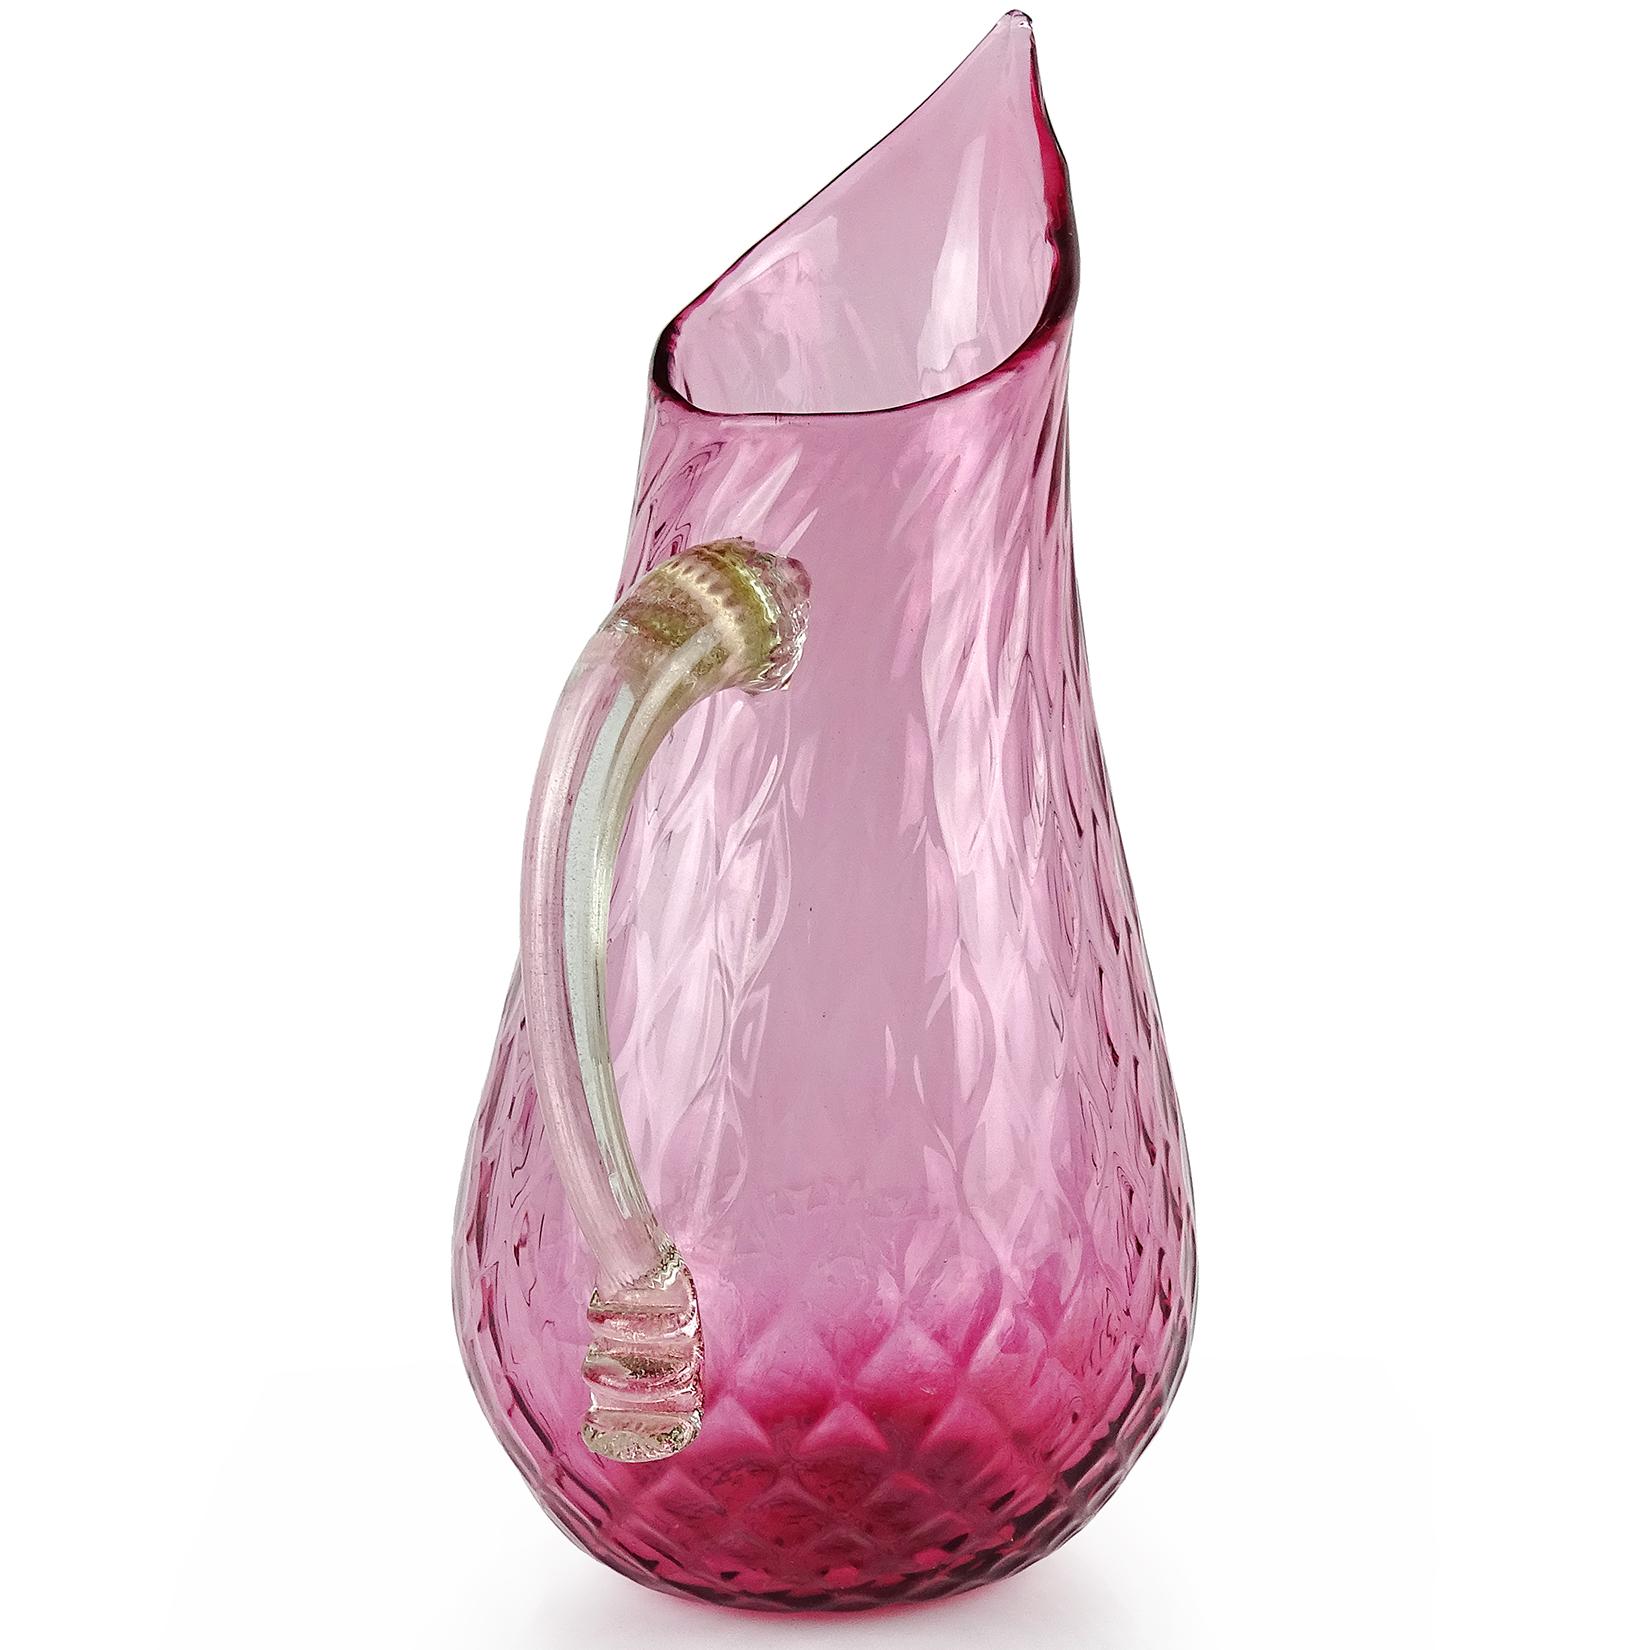 Beautiful large vintage Murano hand blown amethyst pink and gold flecks Italian art glass pitcher / flower vase. It has a diamond quilted design throughout the body, with applied handle in clear and gold leaf. Can be used as a display piece on any